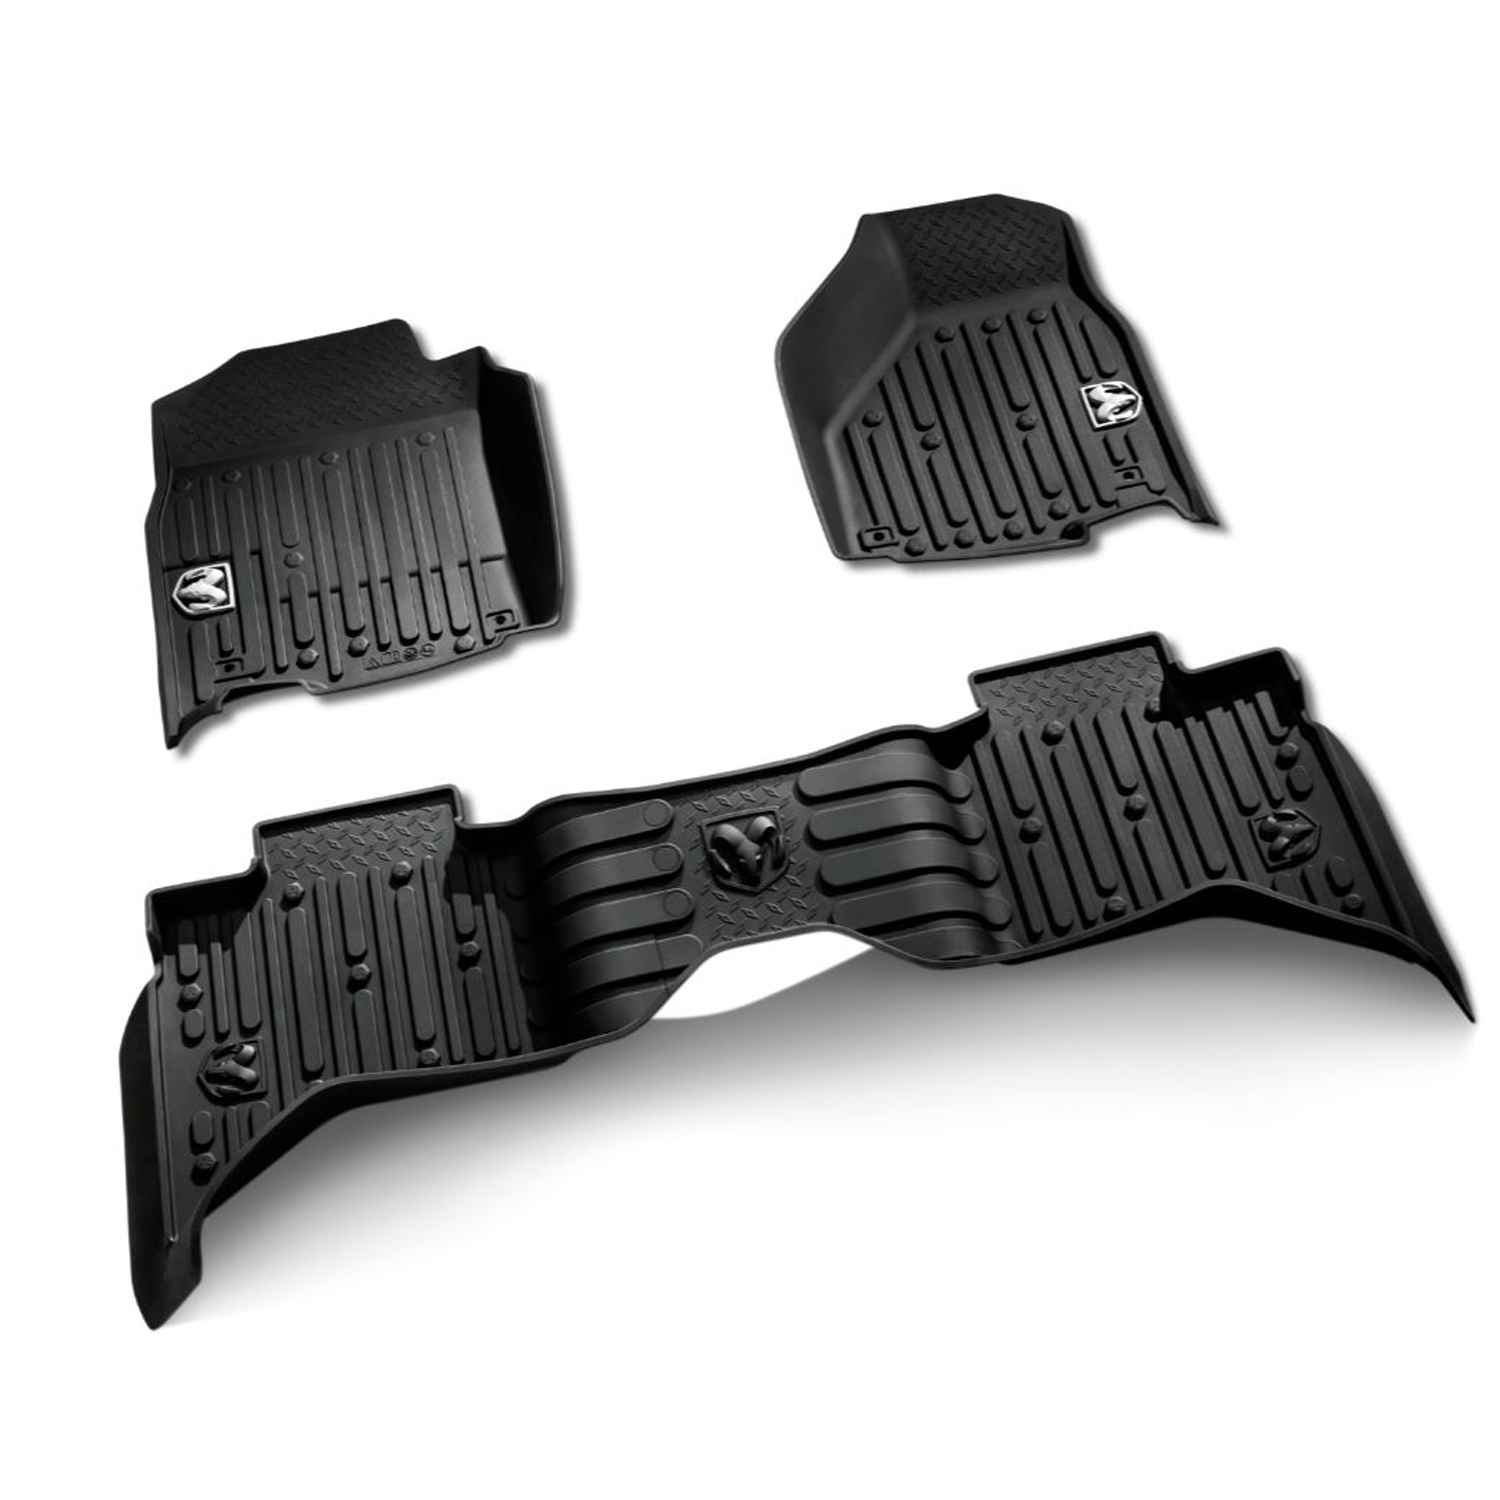 OEM 2015 Ram 4500 Chassis Cab All-weather Floor Mats, bucket-style, Regular Cab, Black (Part #82215579AB)